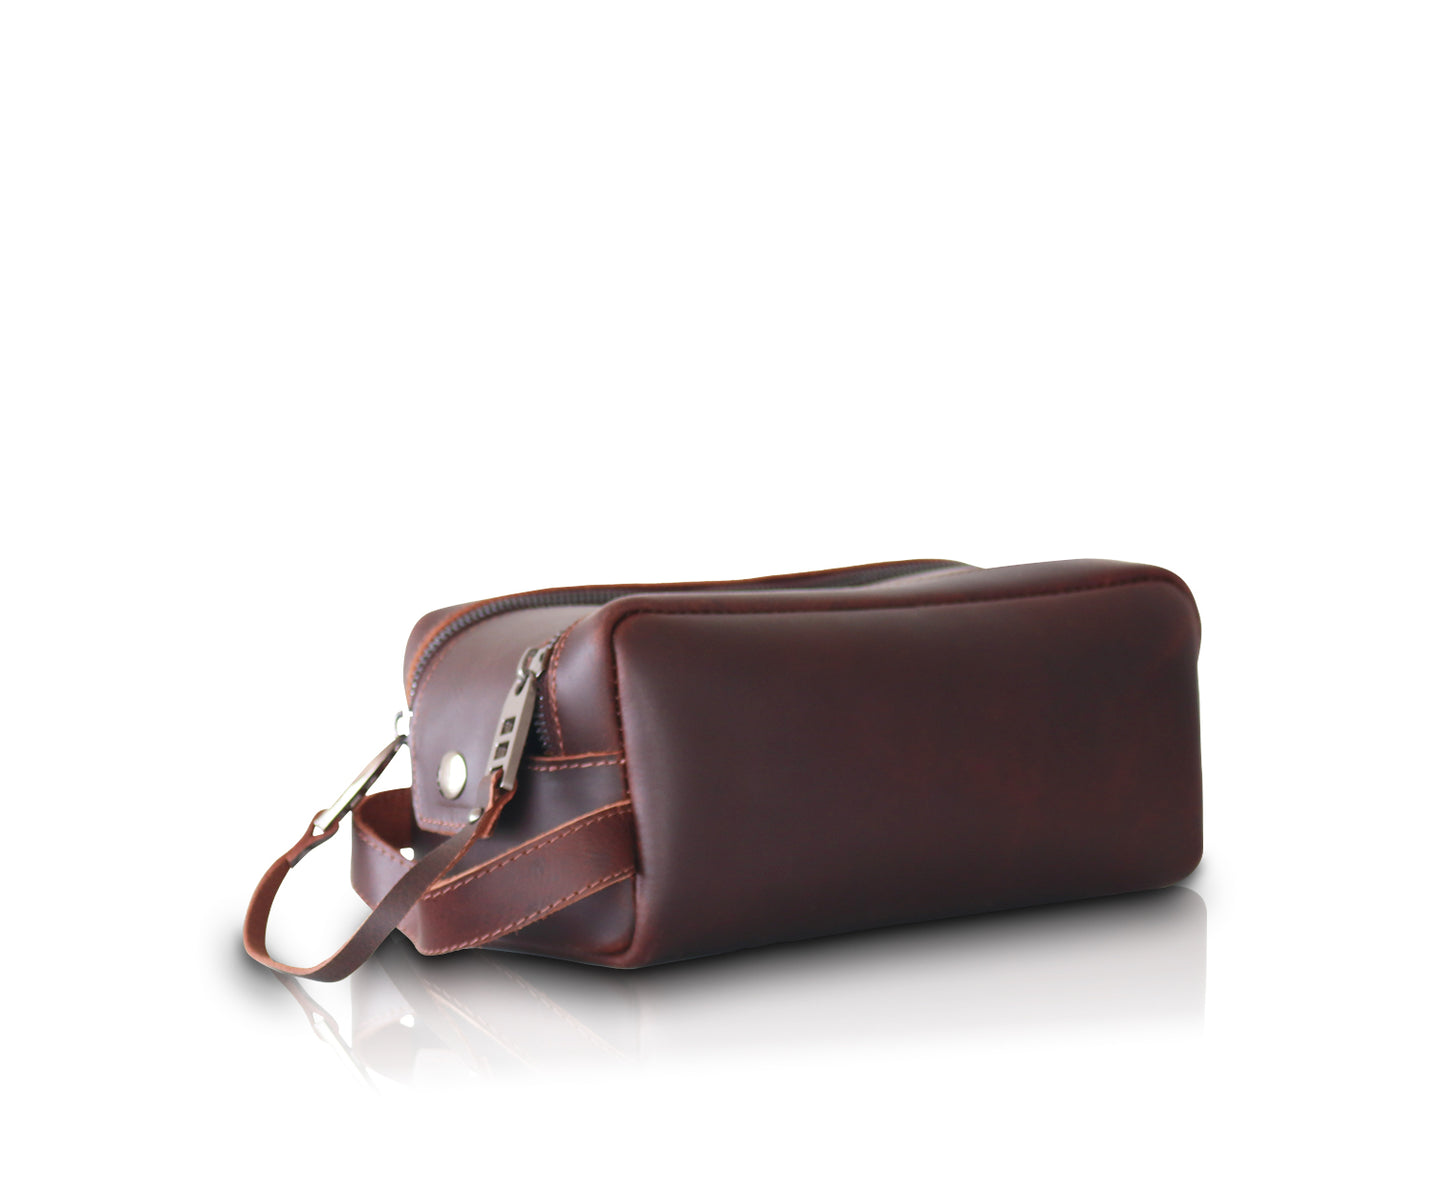 Discover the Best Toiletry Bag for Men – Vellaire